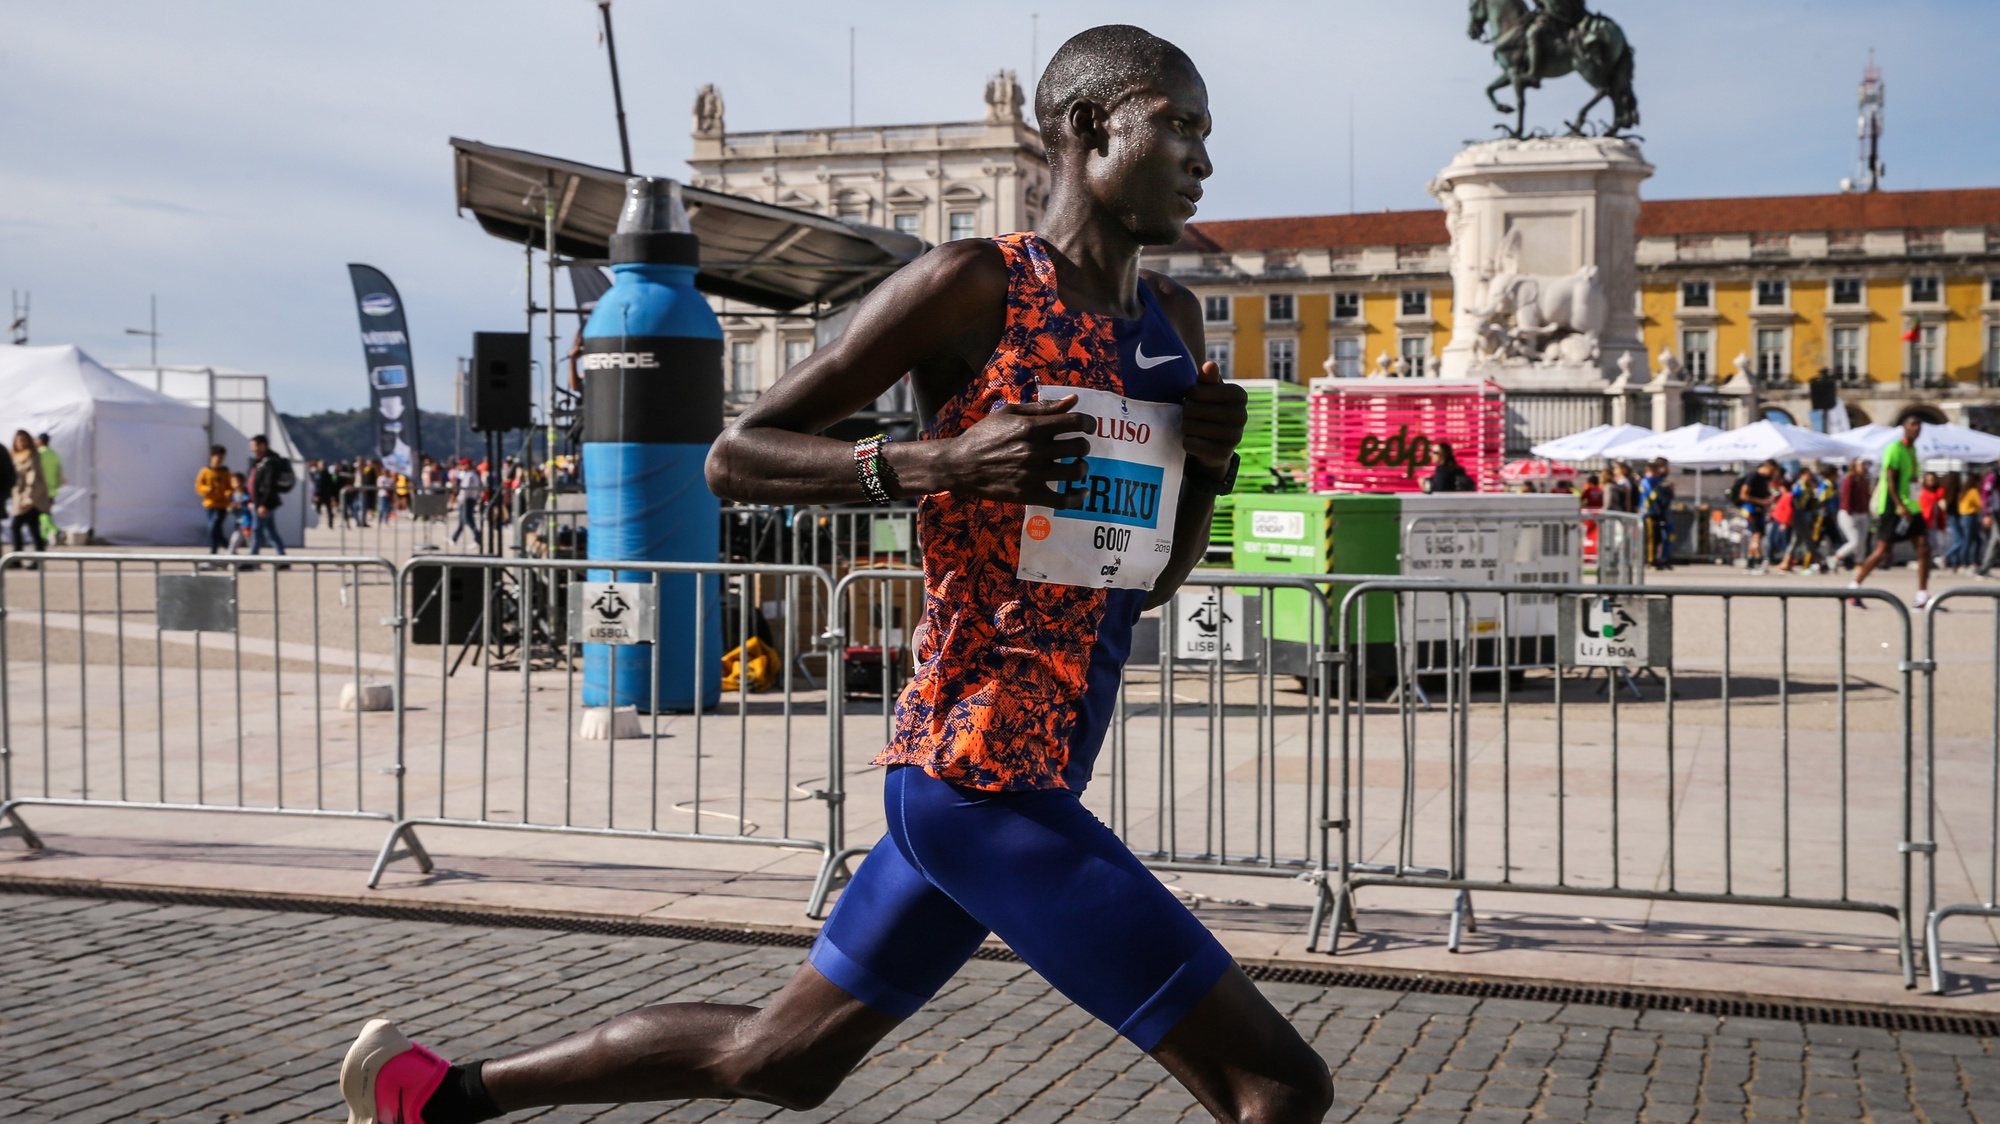 Kenyan athlete Titus Ekiru in action at the Lisbon Half Marathon, 20 October 2019, where he set a new race record by traveling the distance at 1: 00.12 hours. MANUEL DE ALMEIDA / LUSA